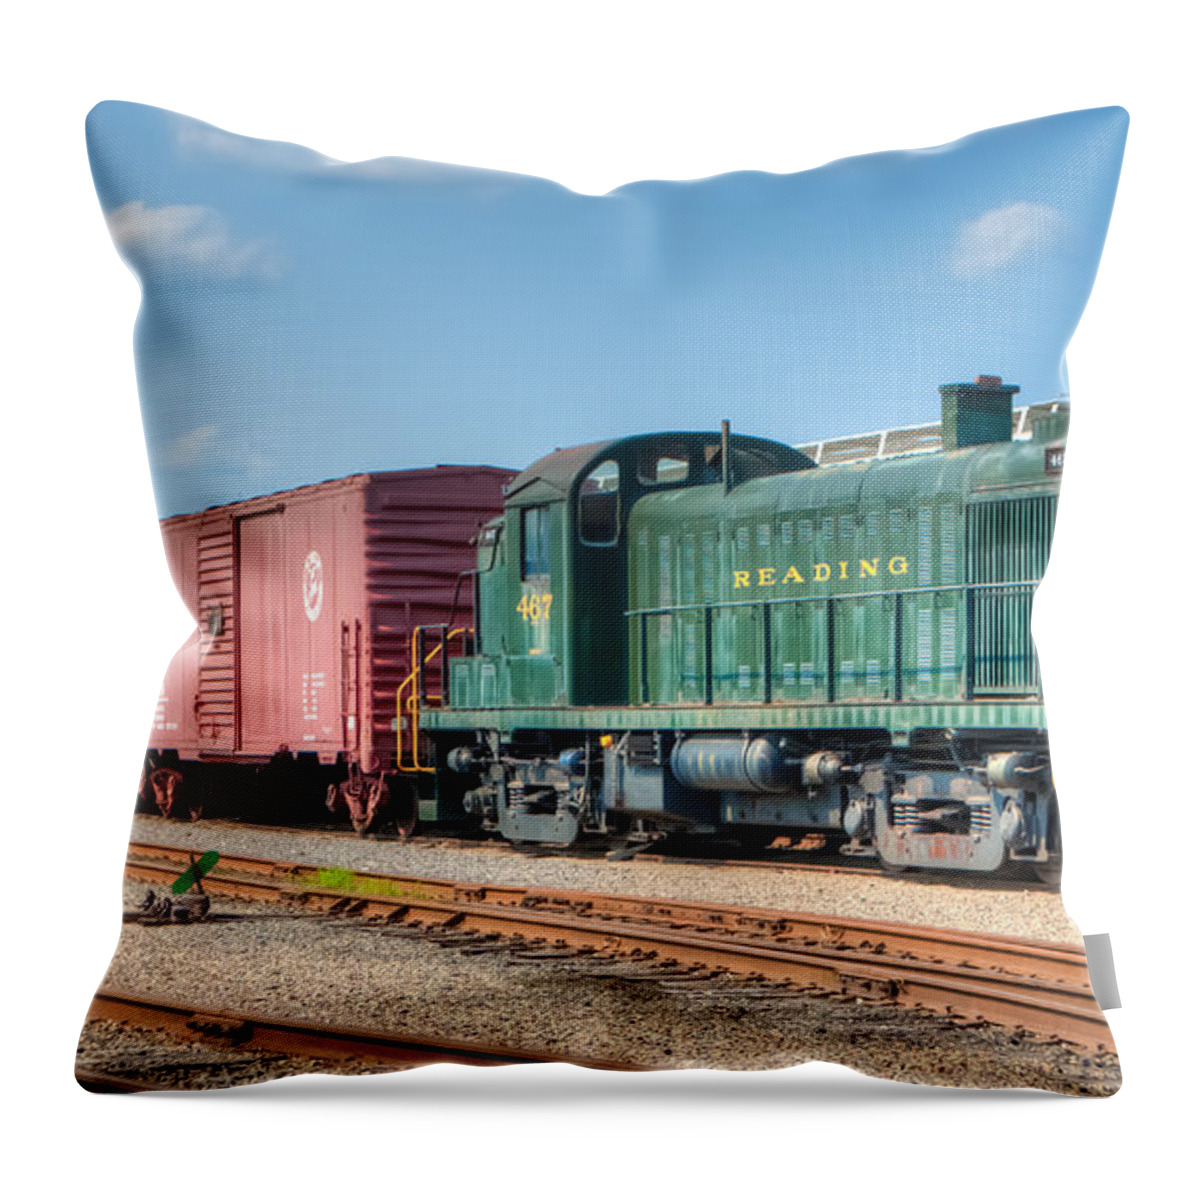 Trains Throw Pillow featuring the photograph Reading 467 by Anthony Sacco